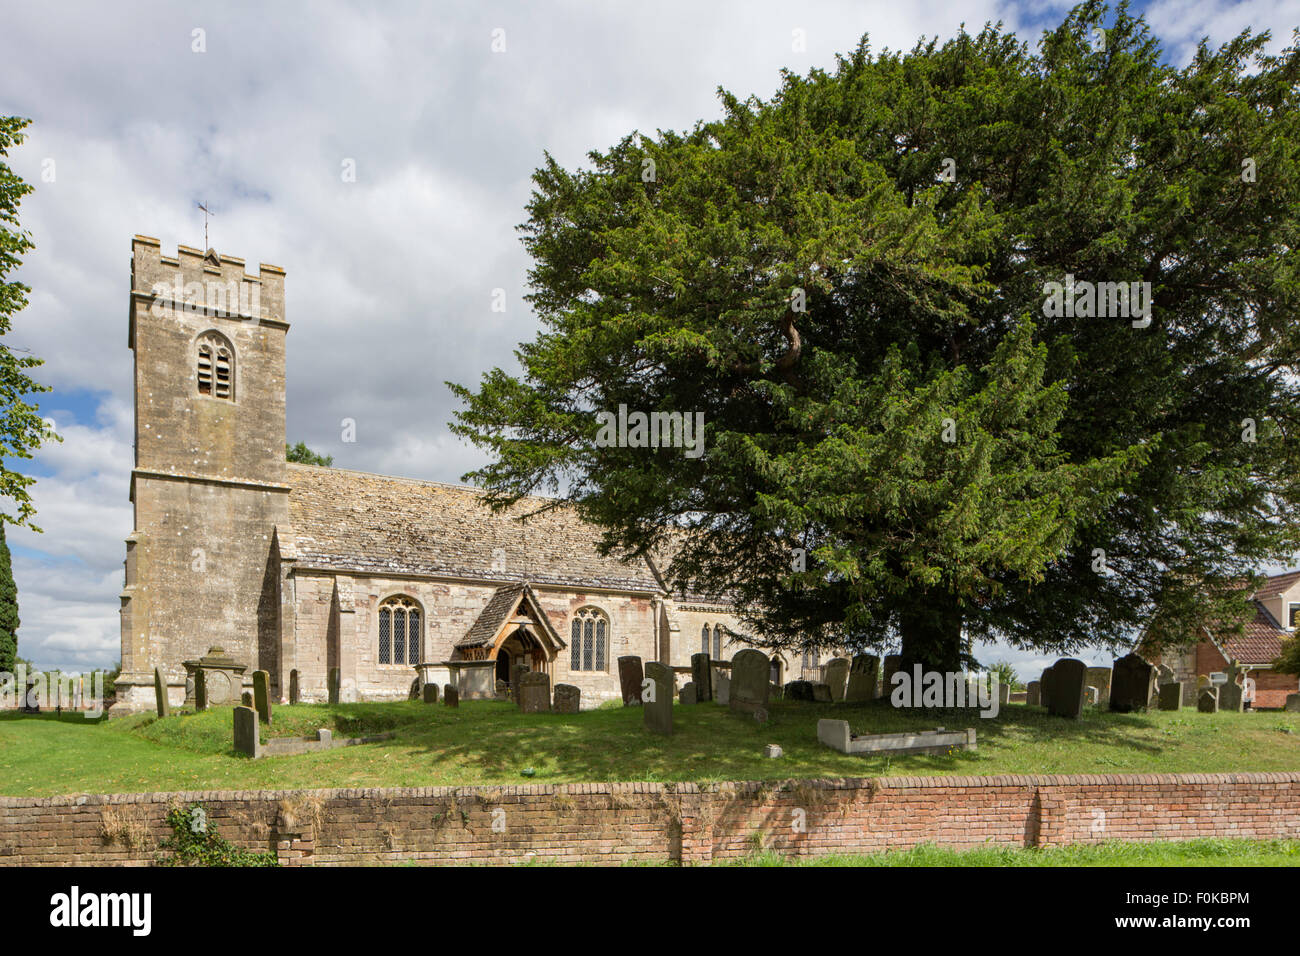 The Church of St James the Great , in the village of Saul, Gloucestershire, England, UK Stock Photo